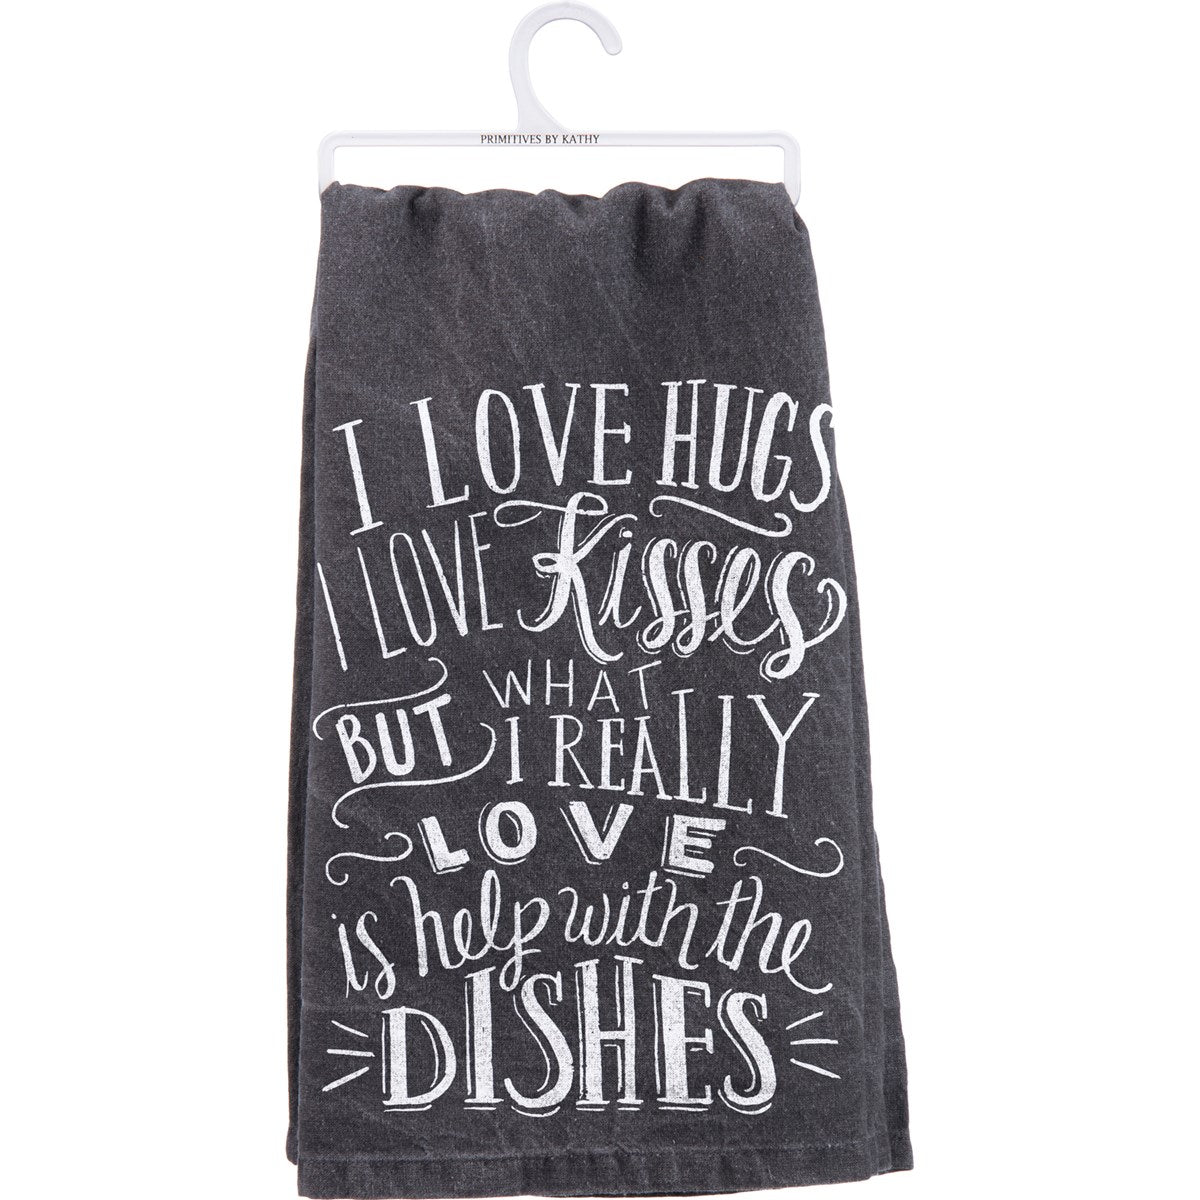 Towel - Help With The Dishes